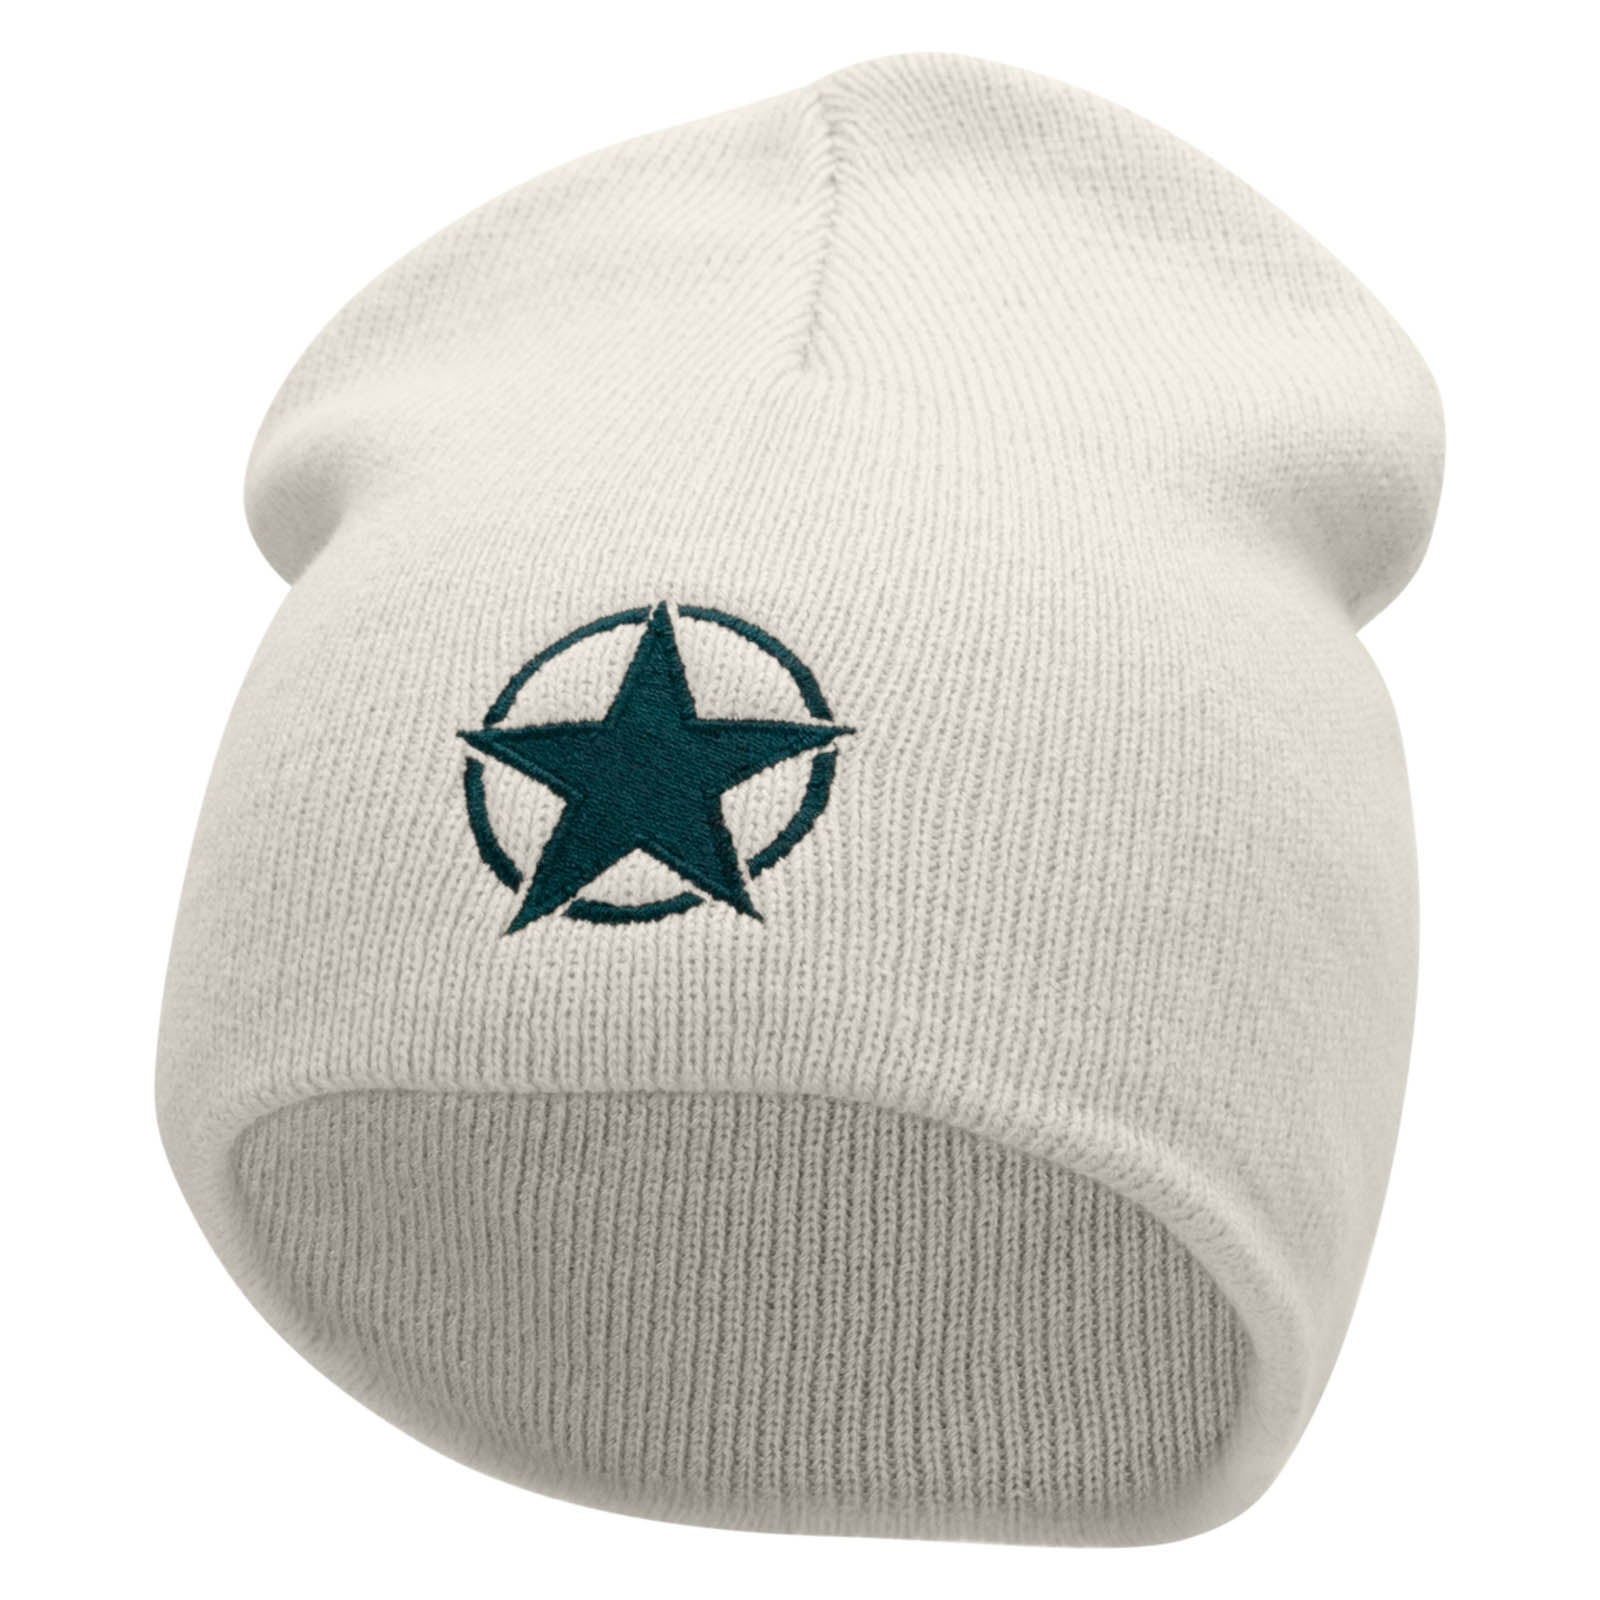 Army Star Badge Embroidered 8 Inch Short Beanie Made in USA - White OSFM